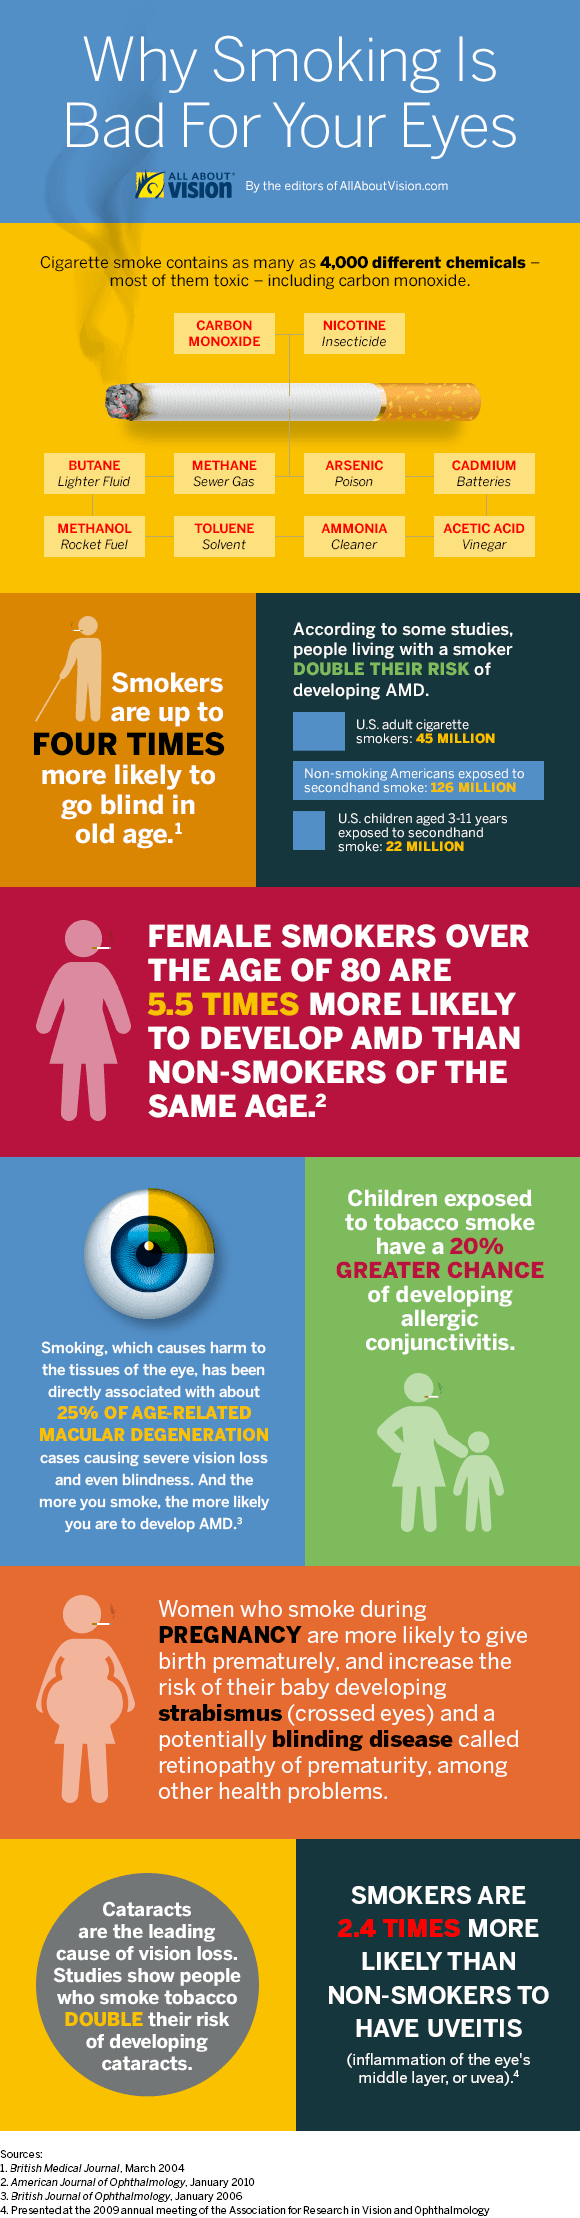 Infographic: Why Smoking is Bad for Your Eyes